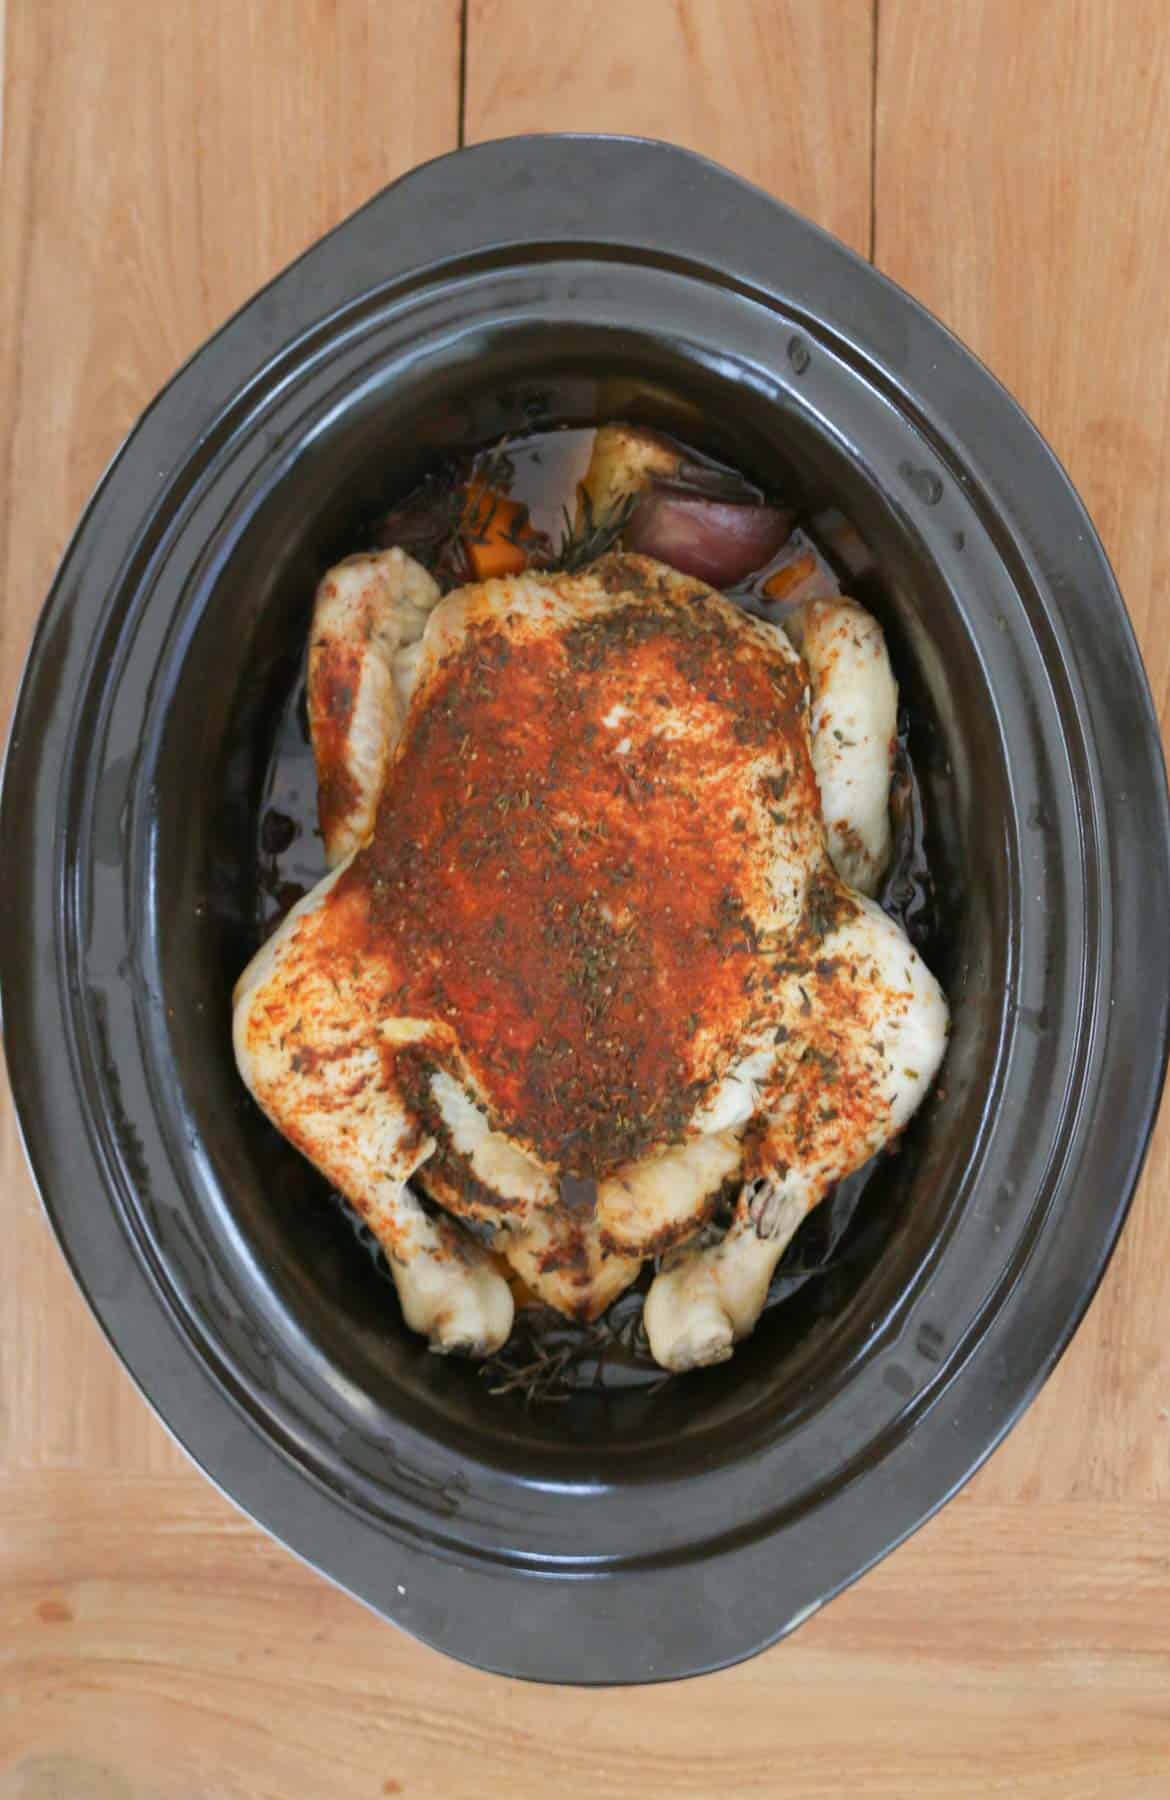 A whole cooked roast chicken in a crock pot.